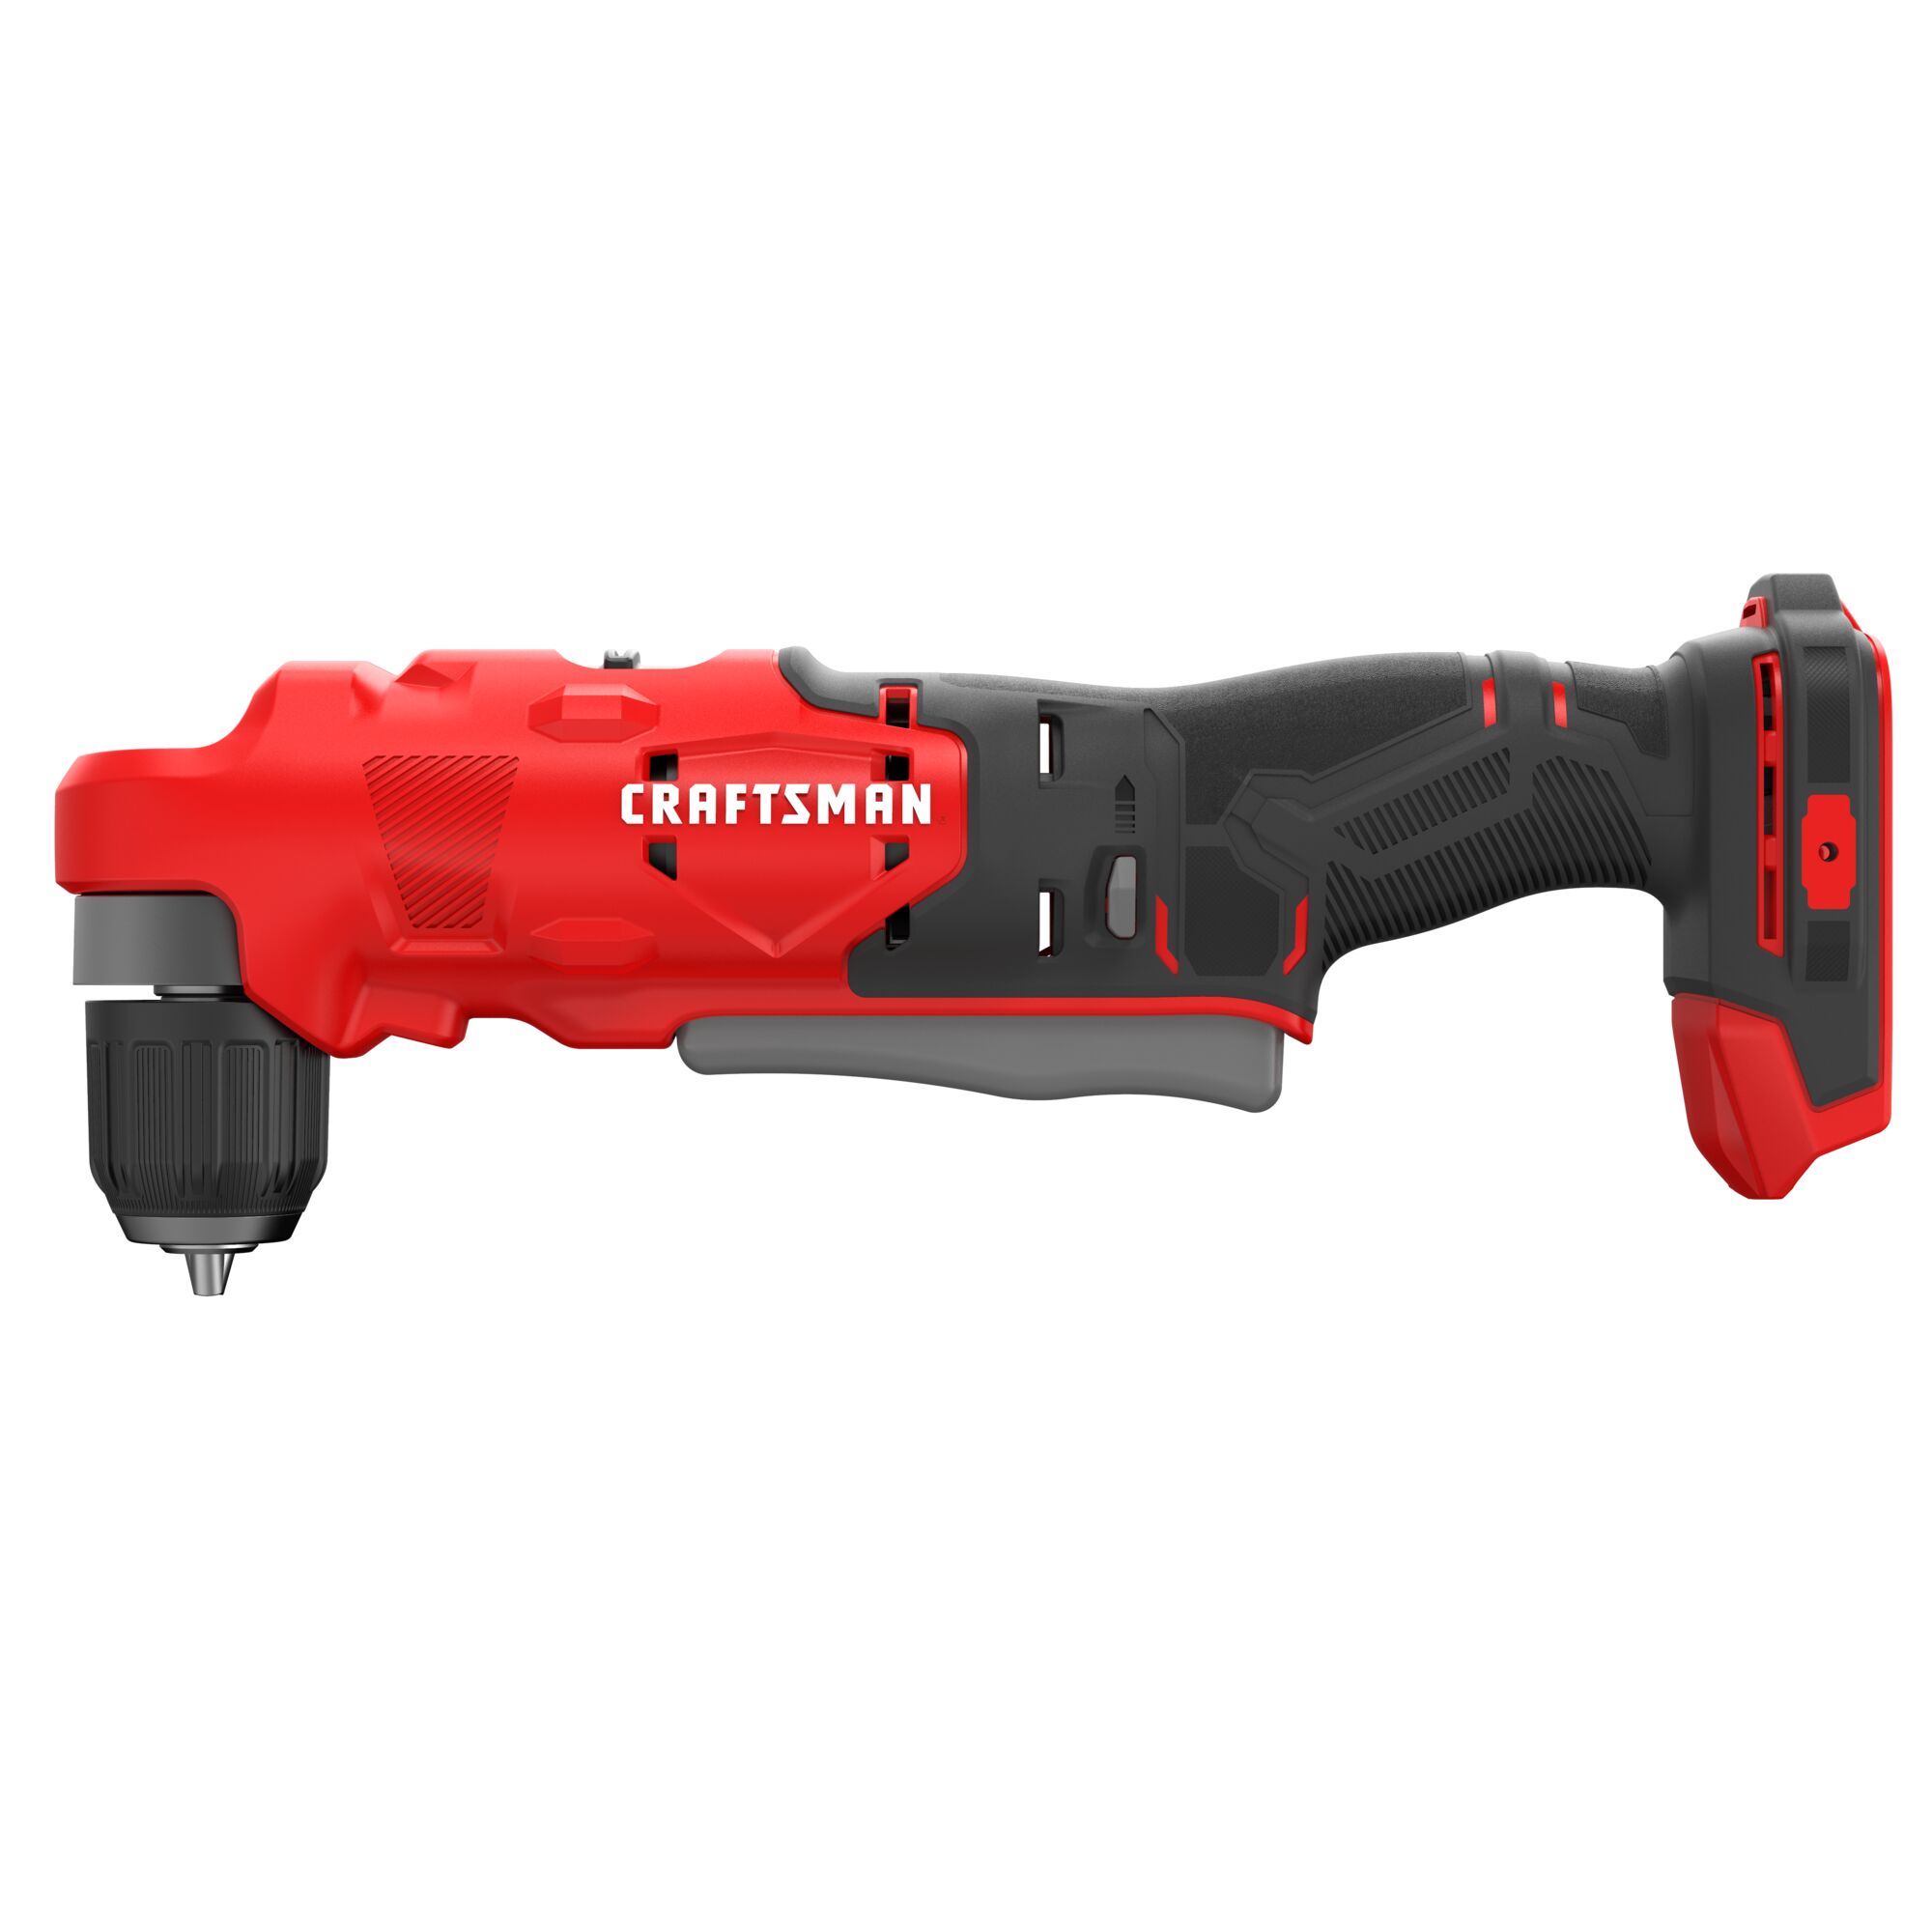 CRAFTSMAN V20 Right Angle Drill on white background